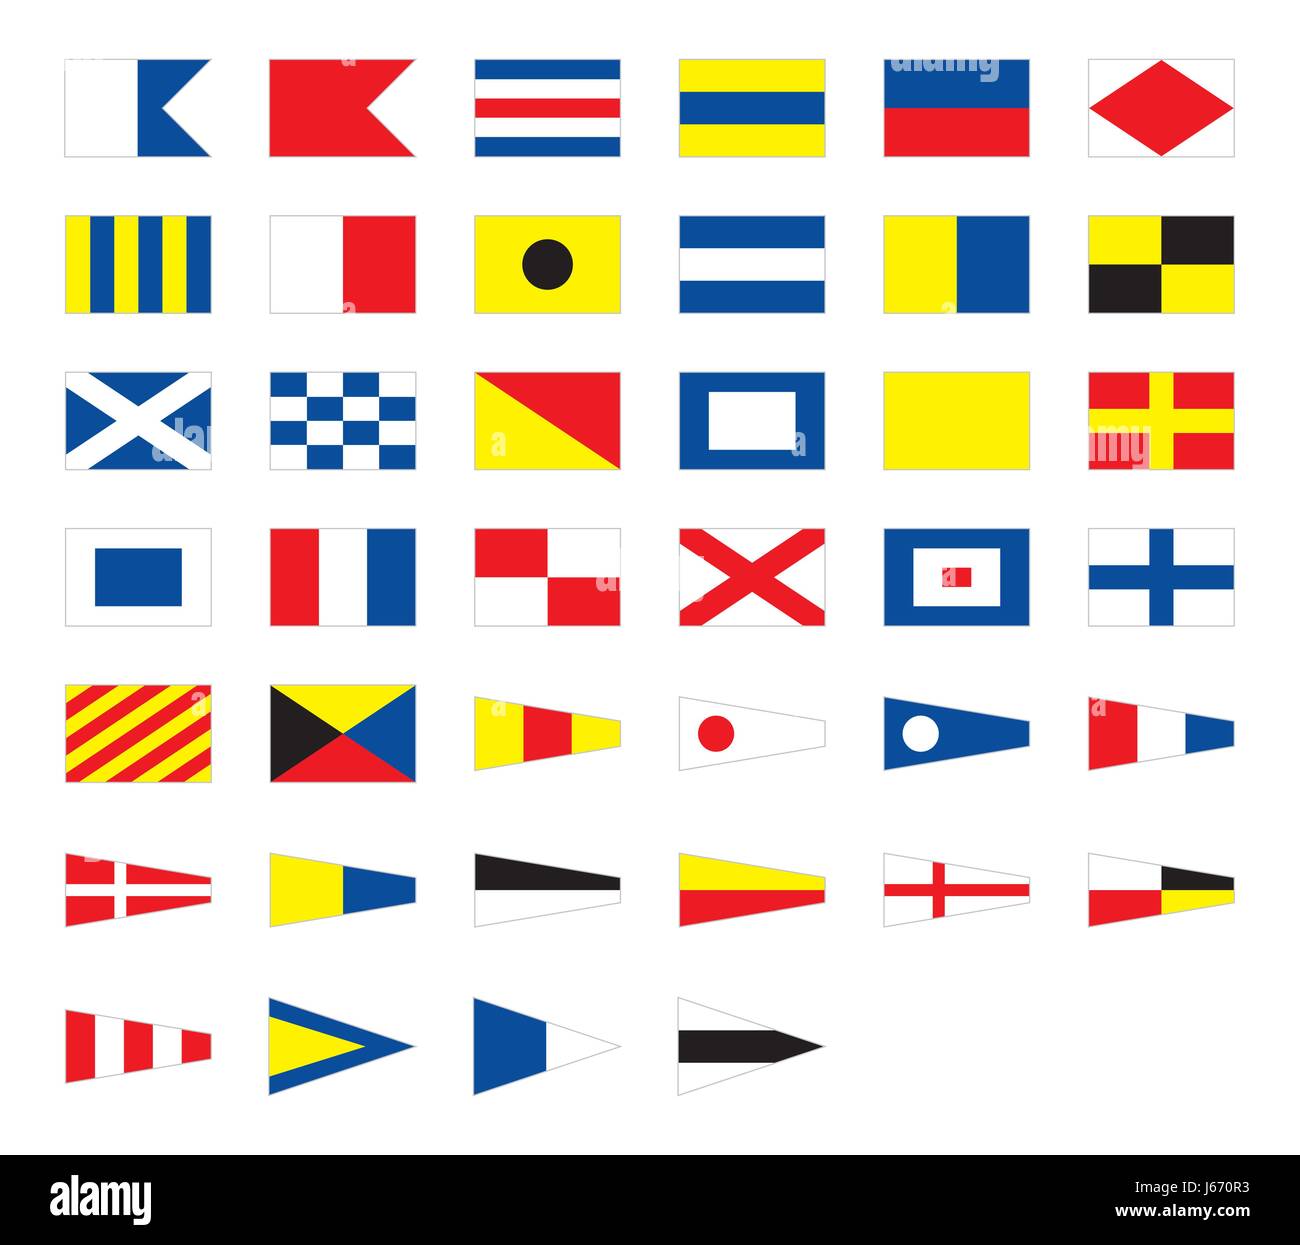 Choose Size Fabric Condition P / Papa Flags Nautical Naval Signal Flag 